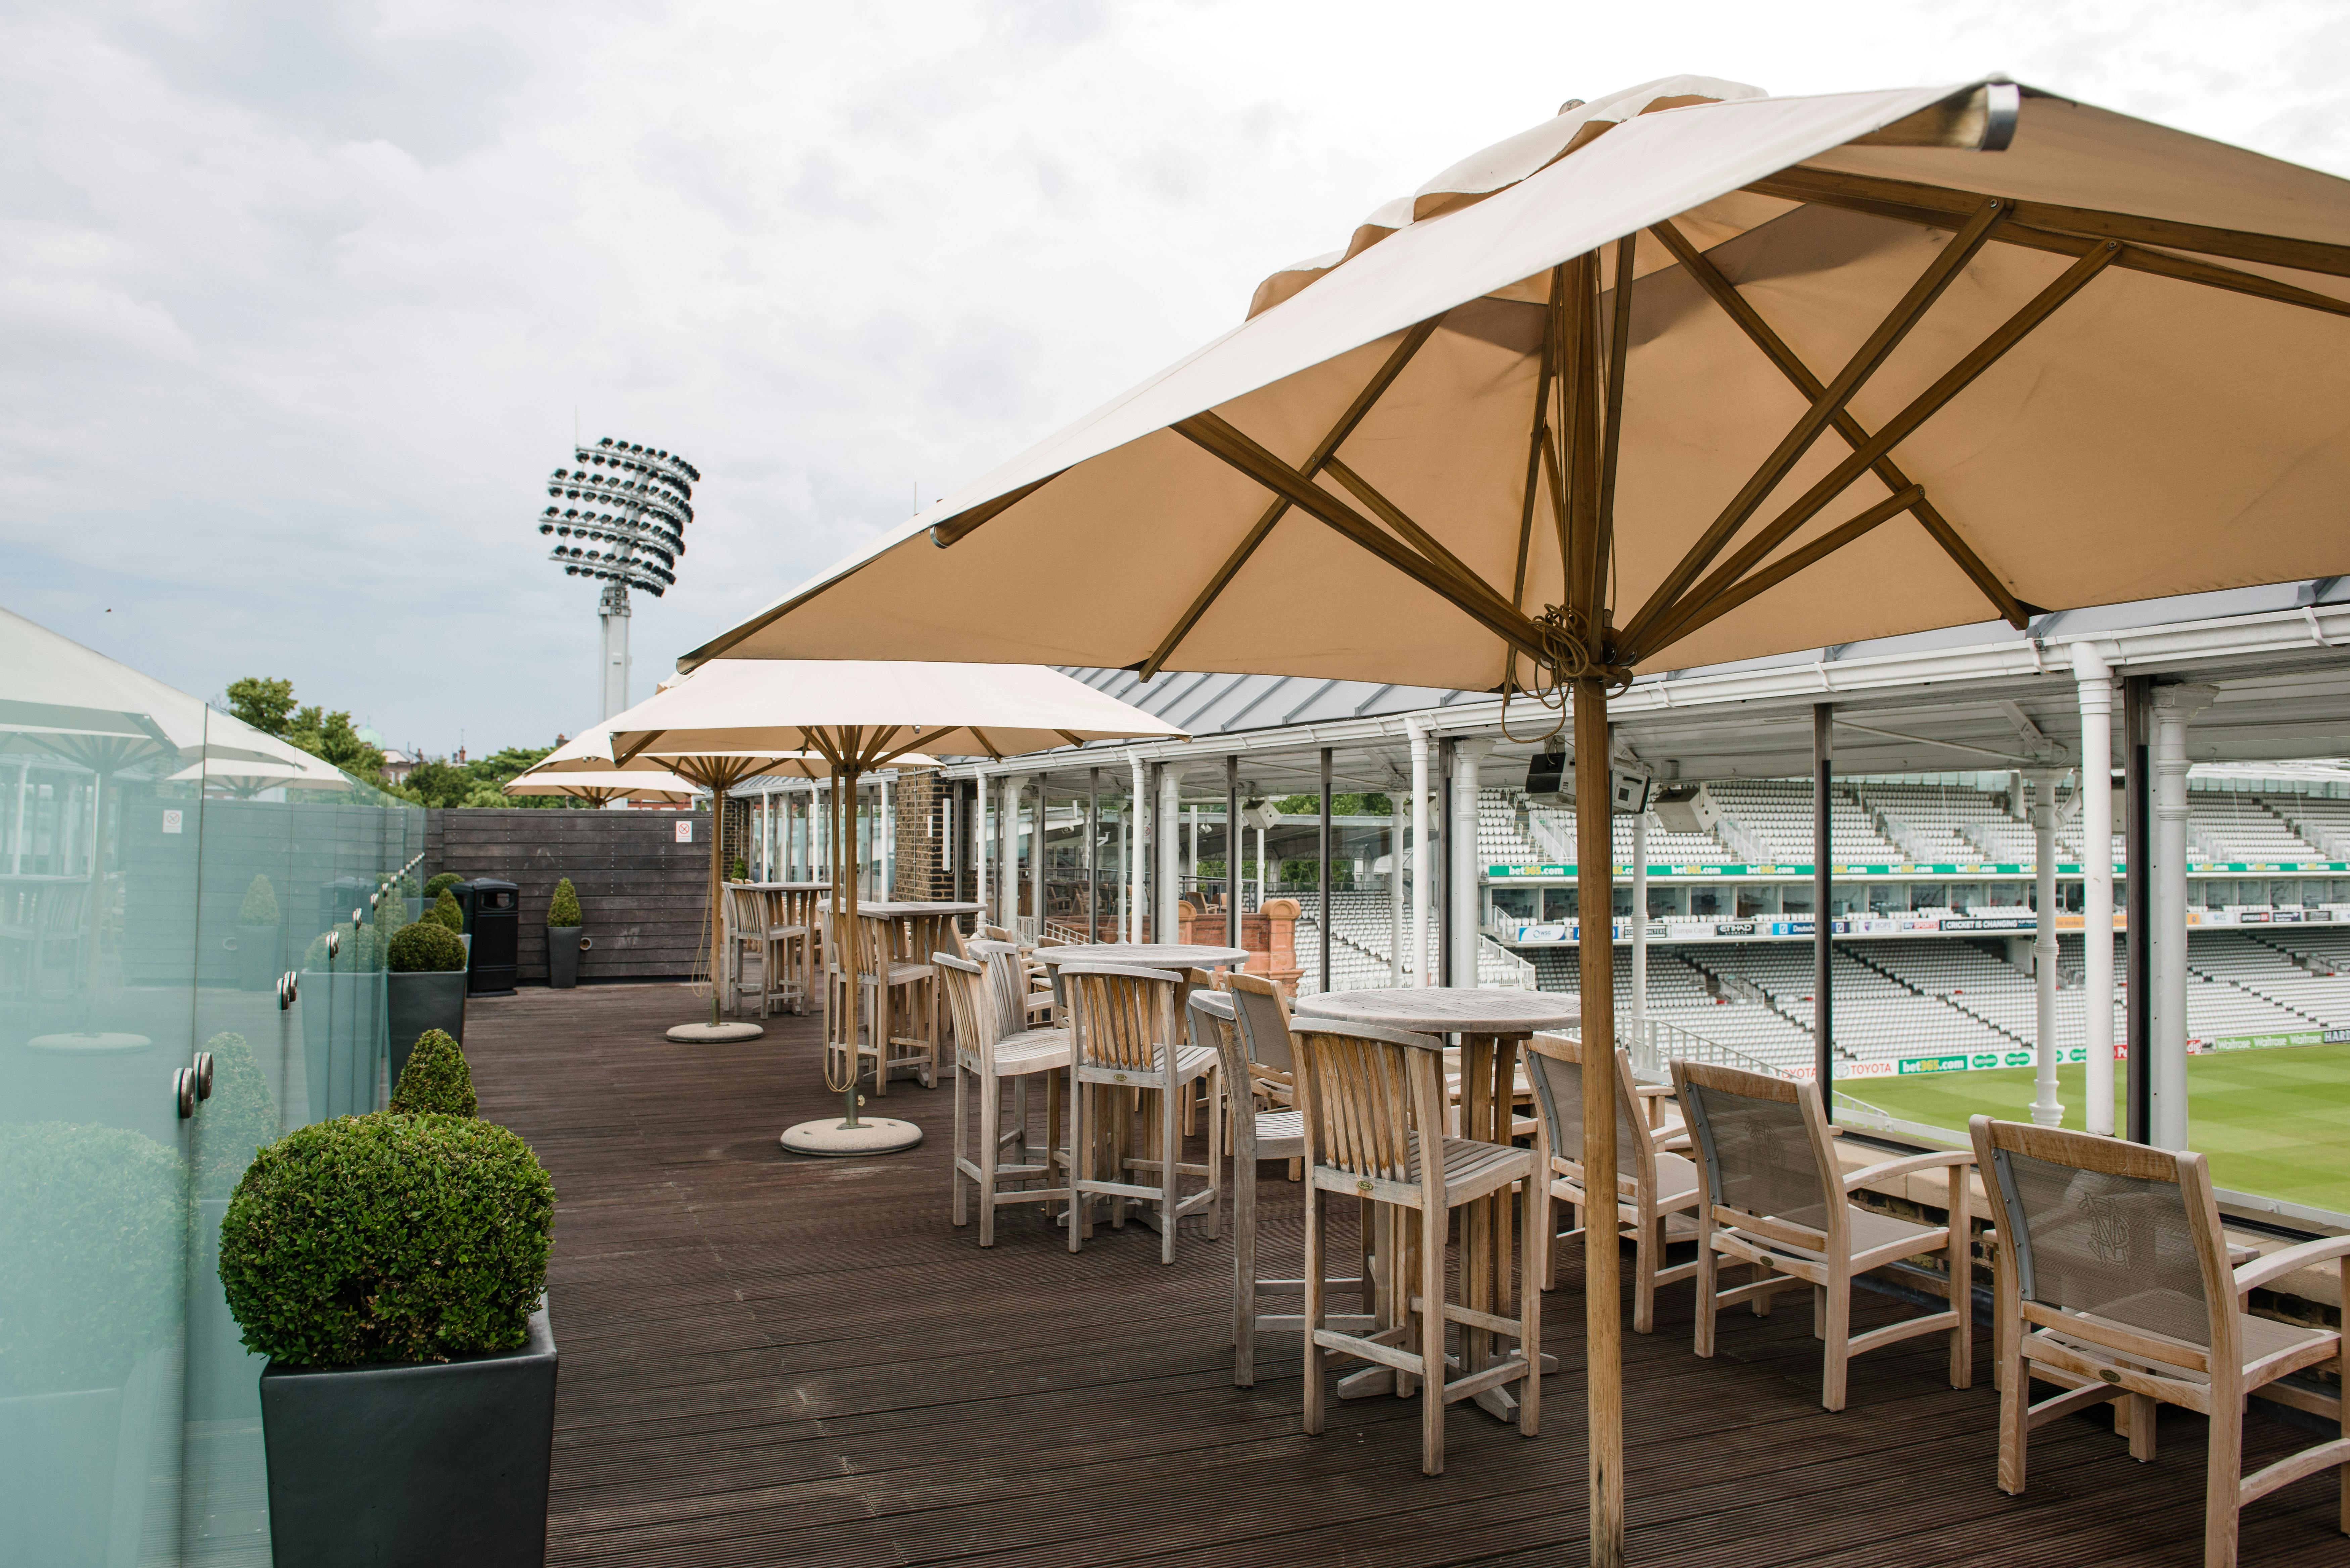 Lord's Cricket Ground - Pavilion Roof Terrace image 4